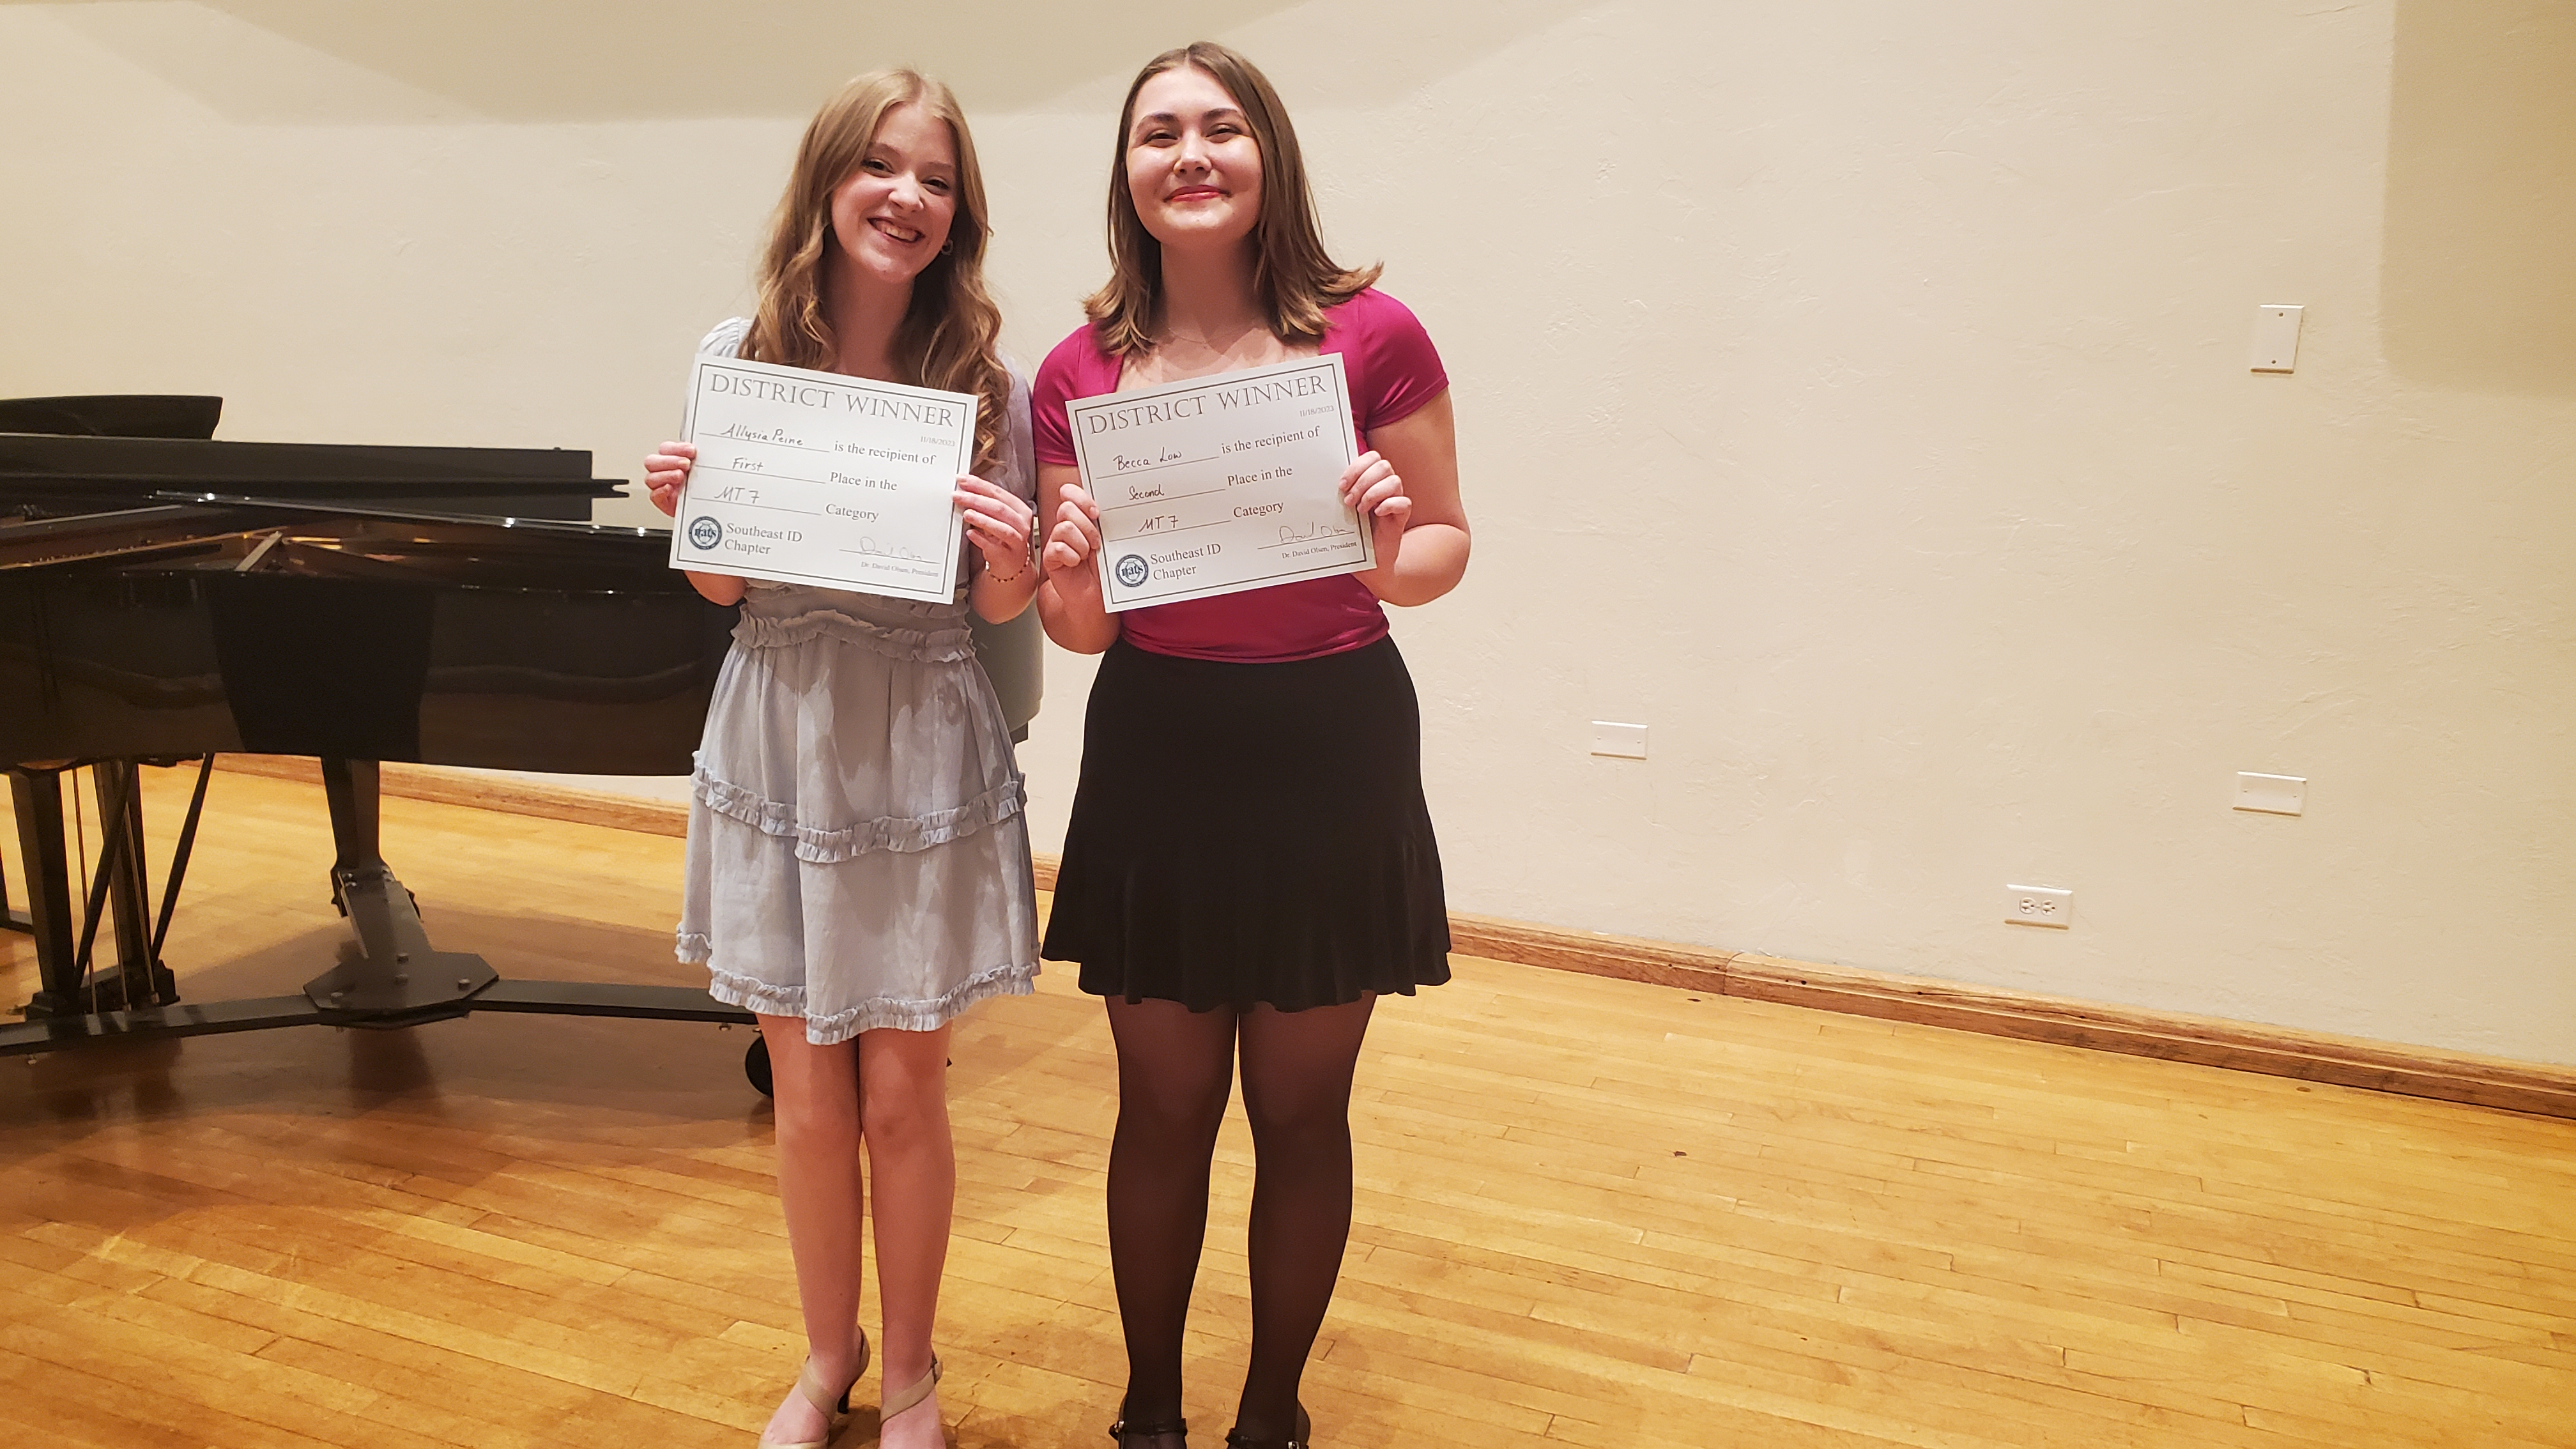 2 winning students pose with certificates in front of a grand piano